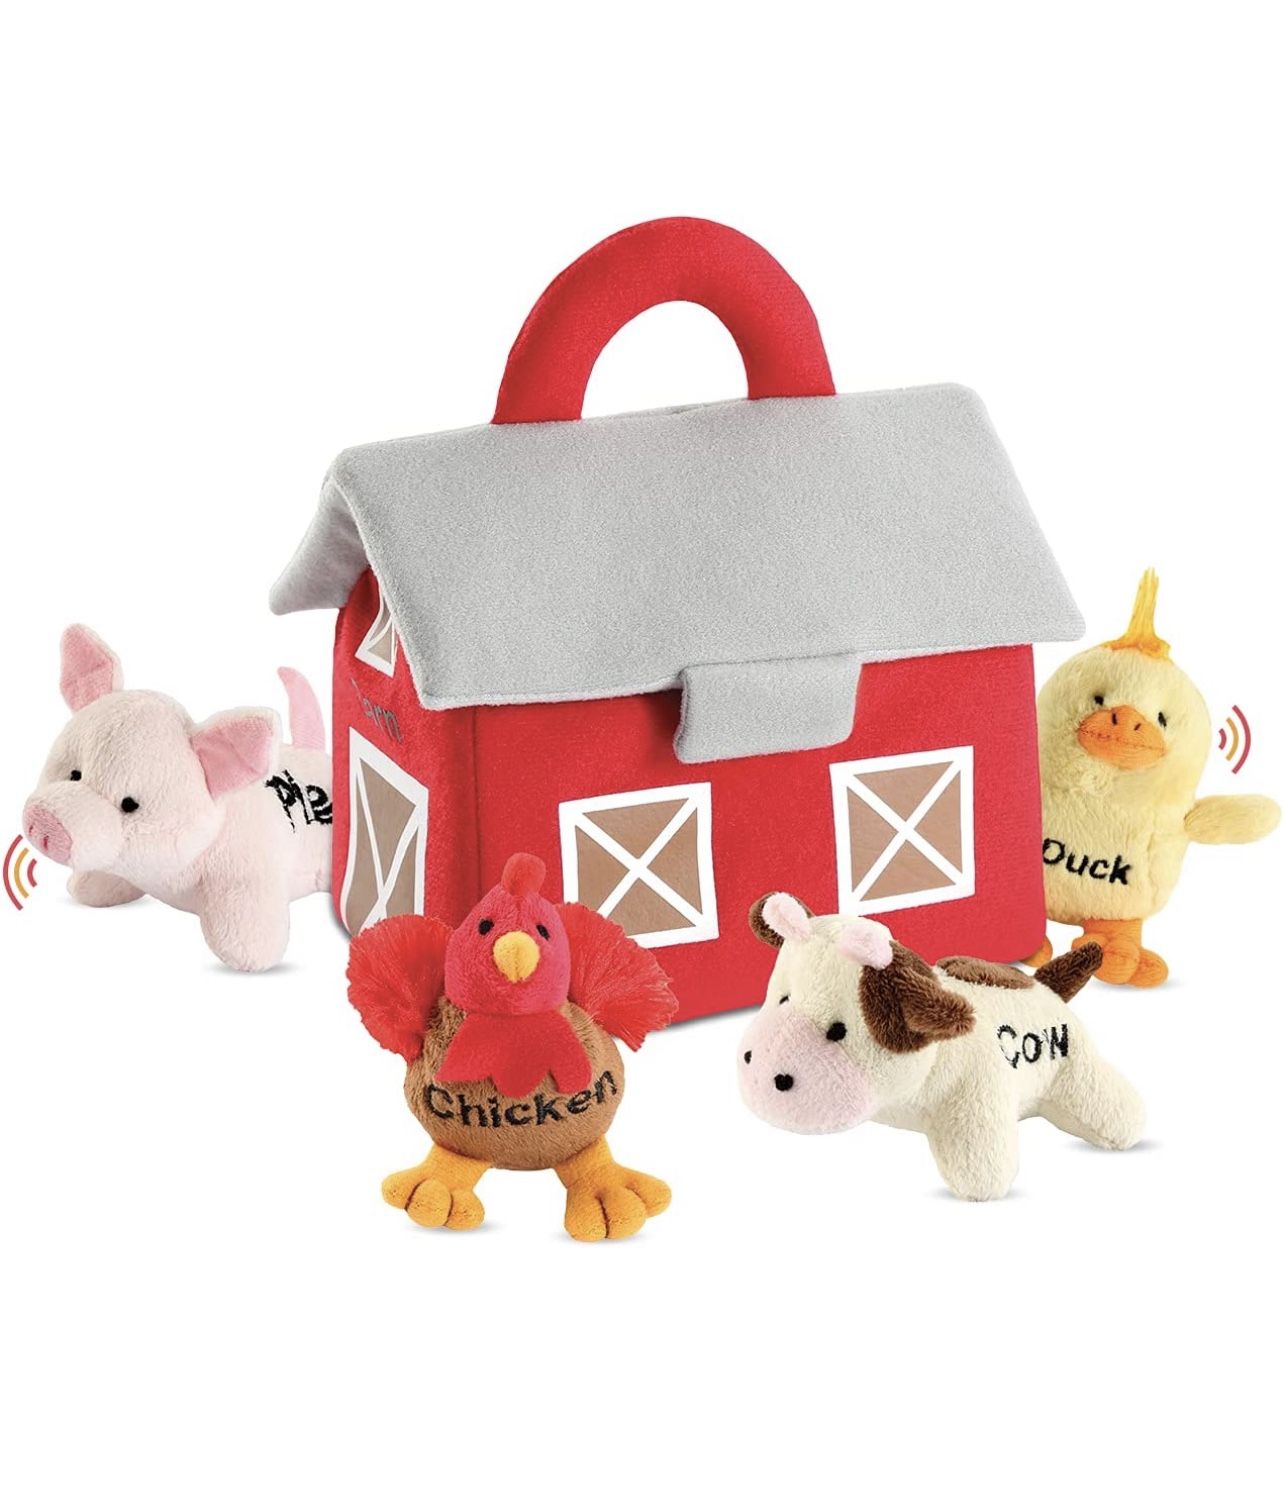  Plush Farm Animal Toys with Sounds - Plushie Play Set with Cute Talking Barn Animals in a Barn Carrier